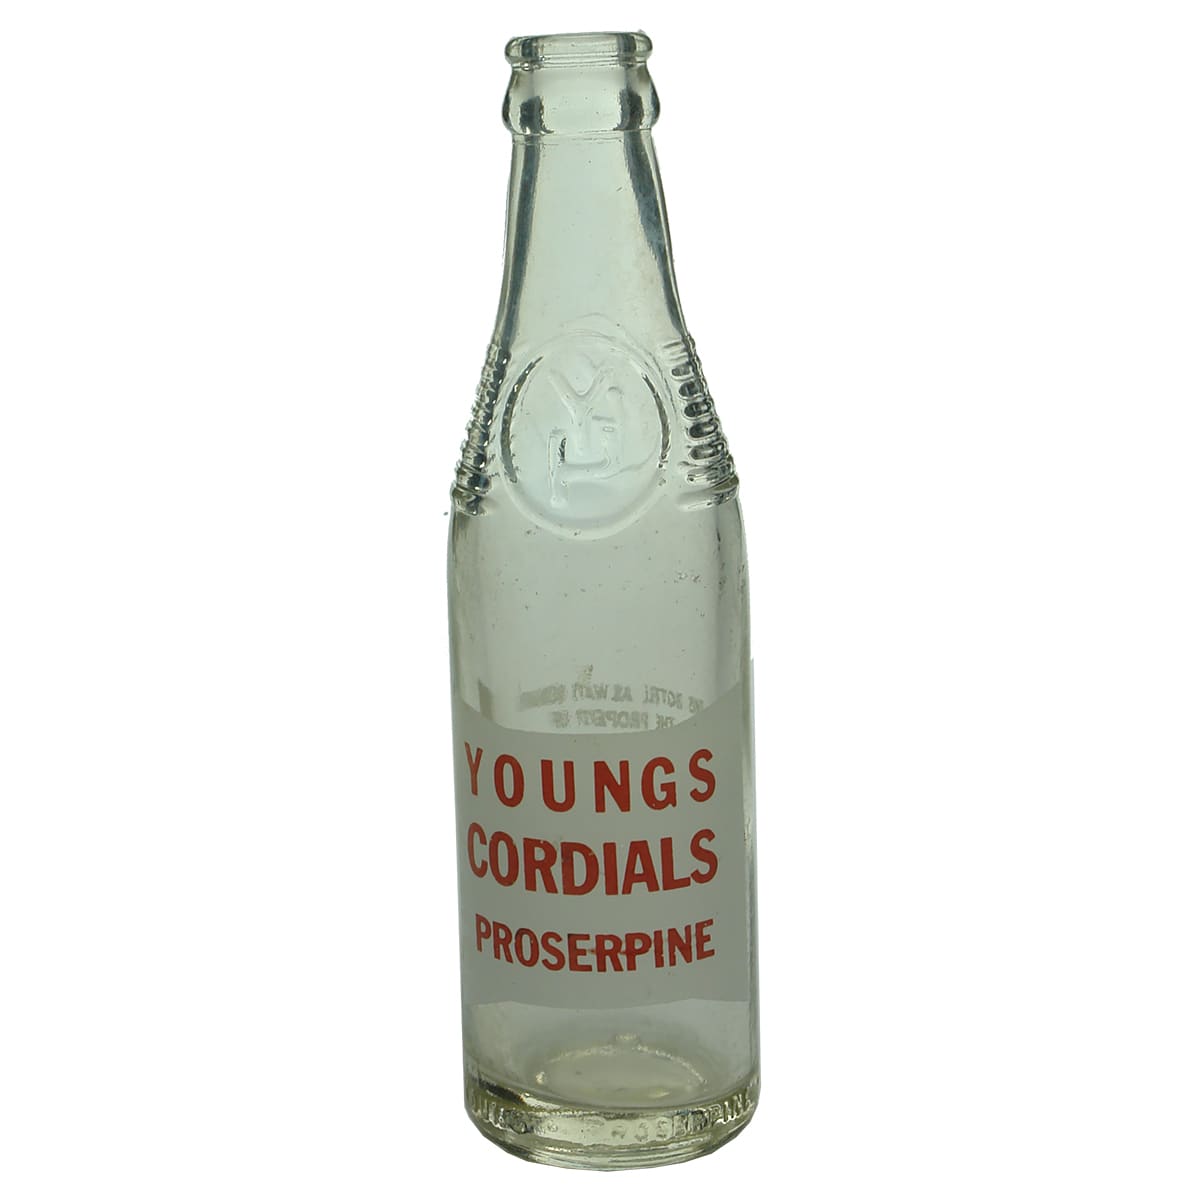 Crown Seal. Youngs Cordials, Proserpine. Red and white print. 7 oz. (Queensland)